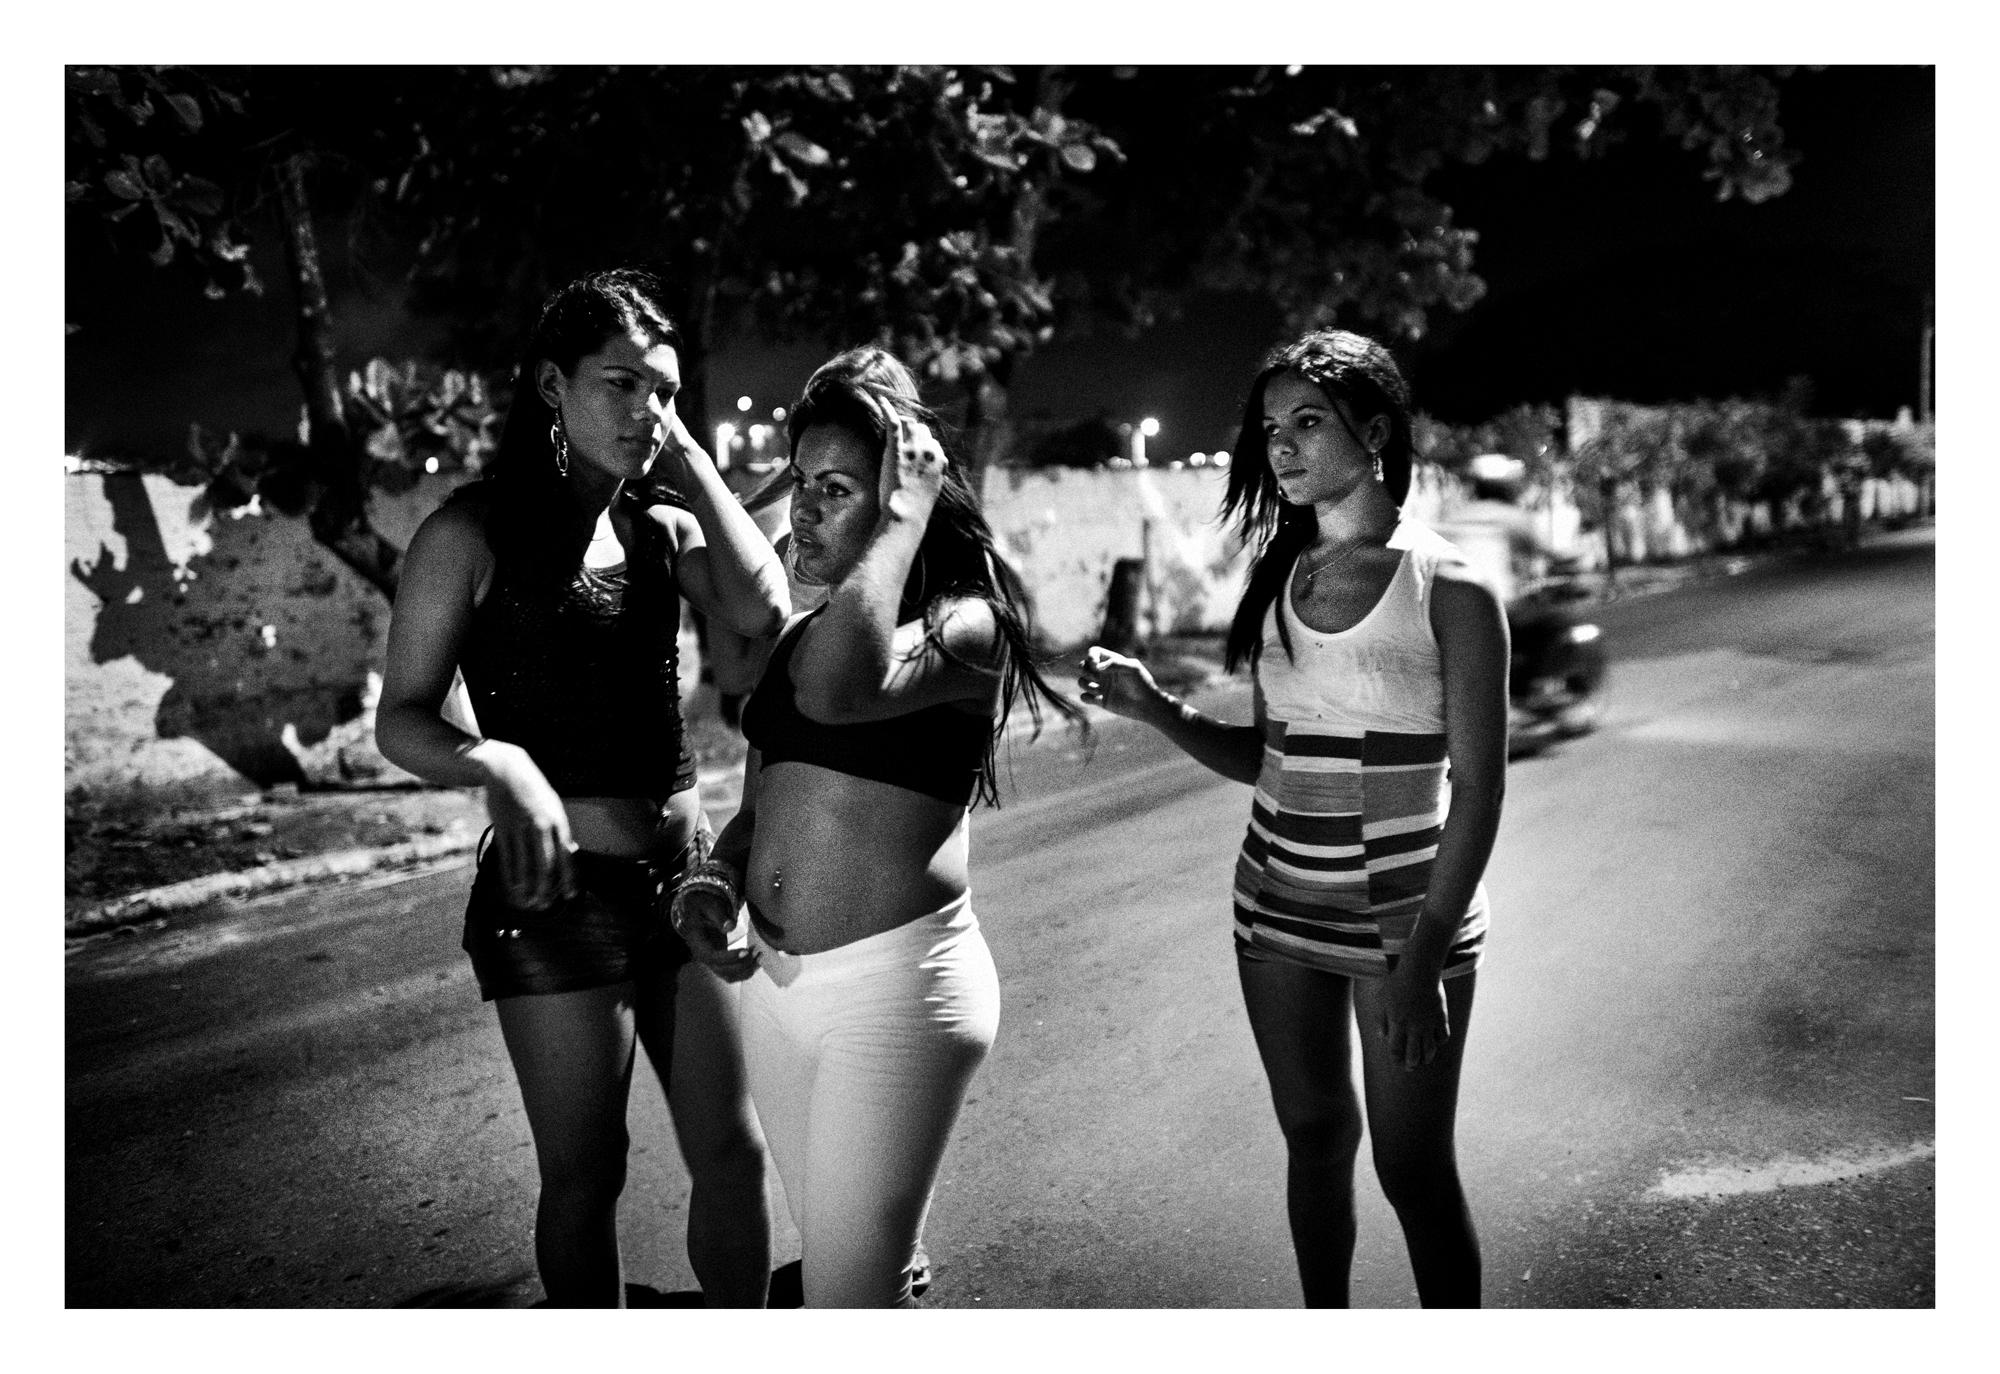 All imperfect things - Fortaleza, Brazil. April 2012. Samilly (right), Emyle...